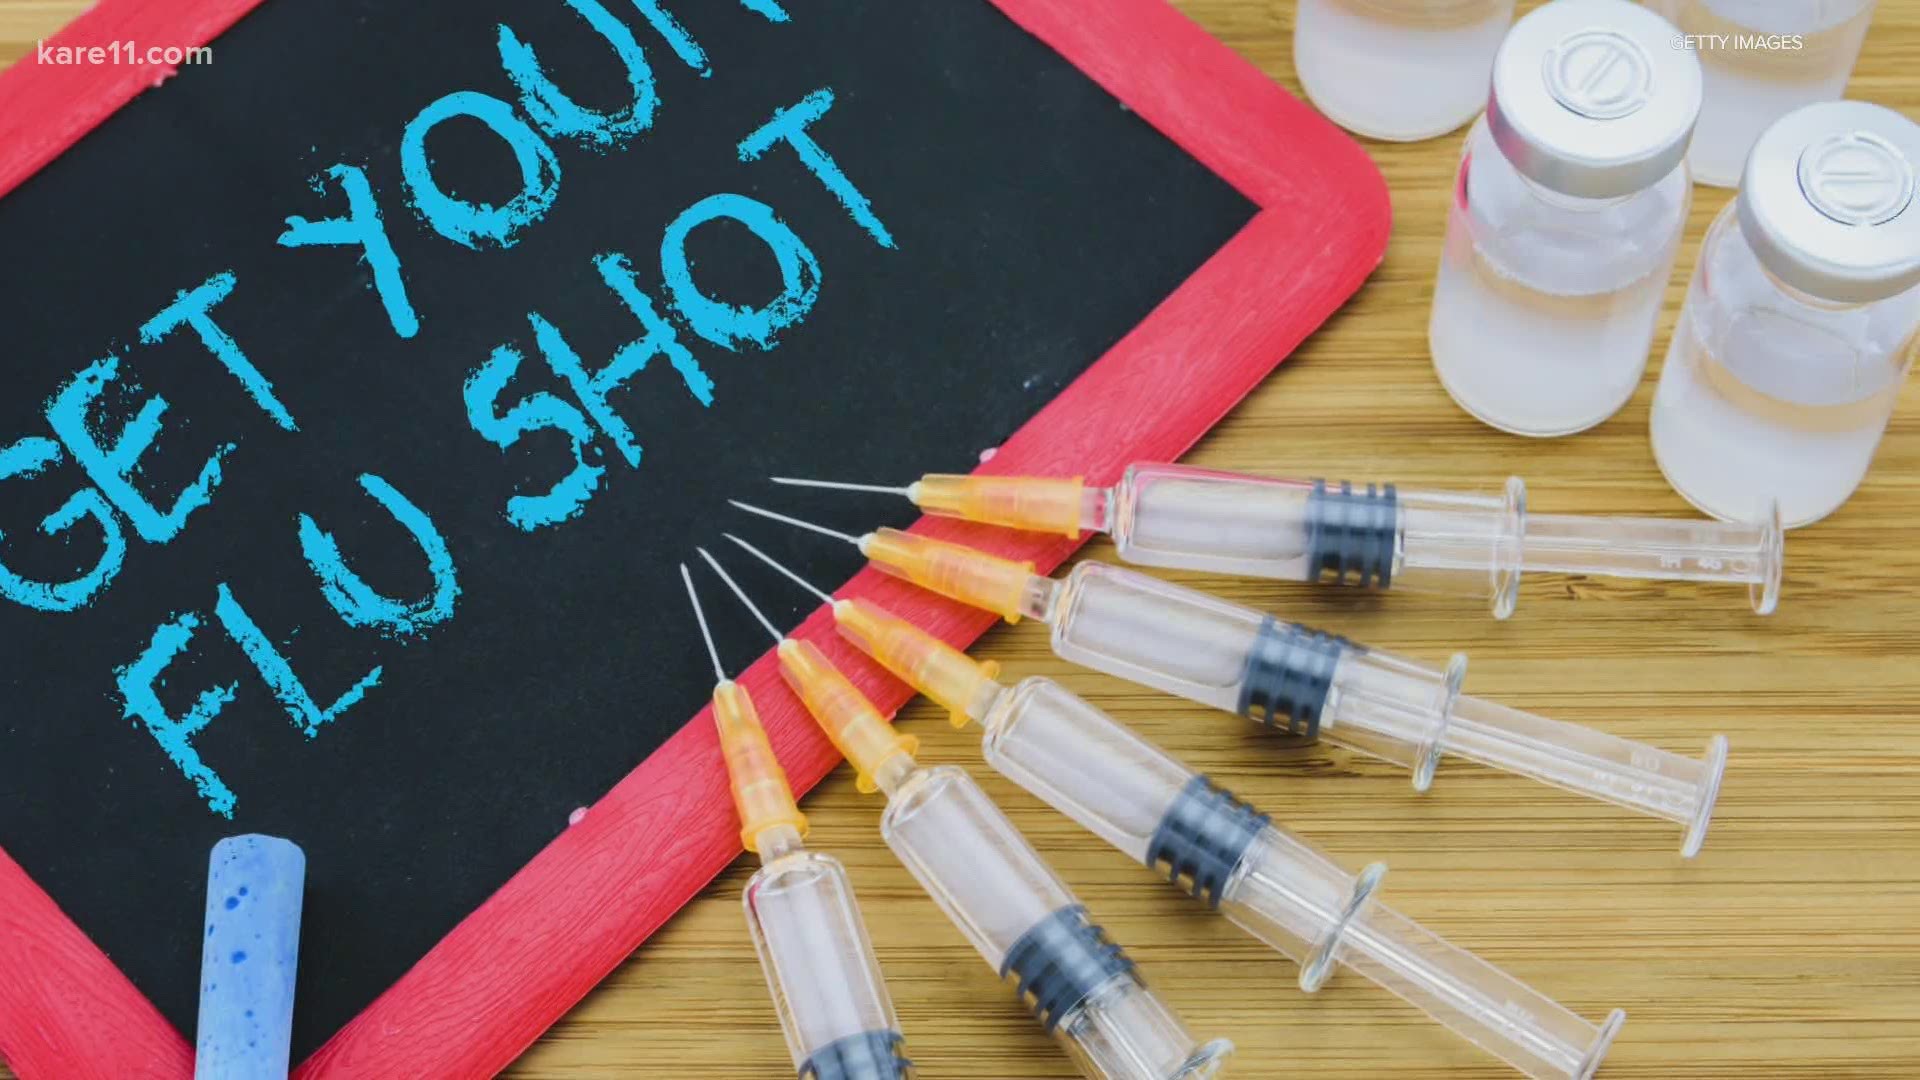 Every year we hear how important it is to get a flu shot. But this season, with COVID-19 in play, it's more important than ever